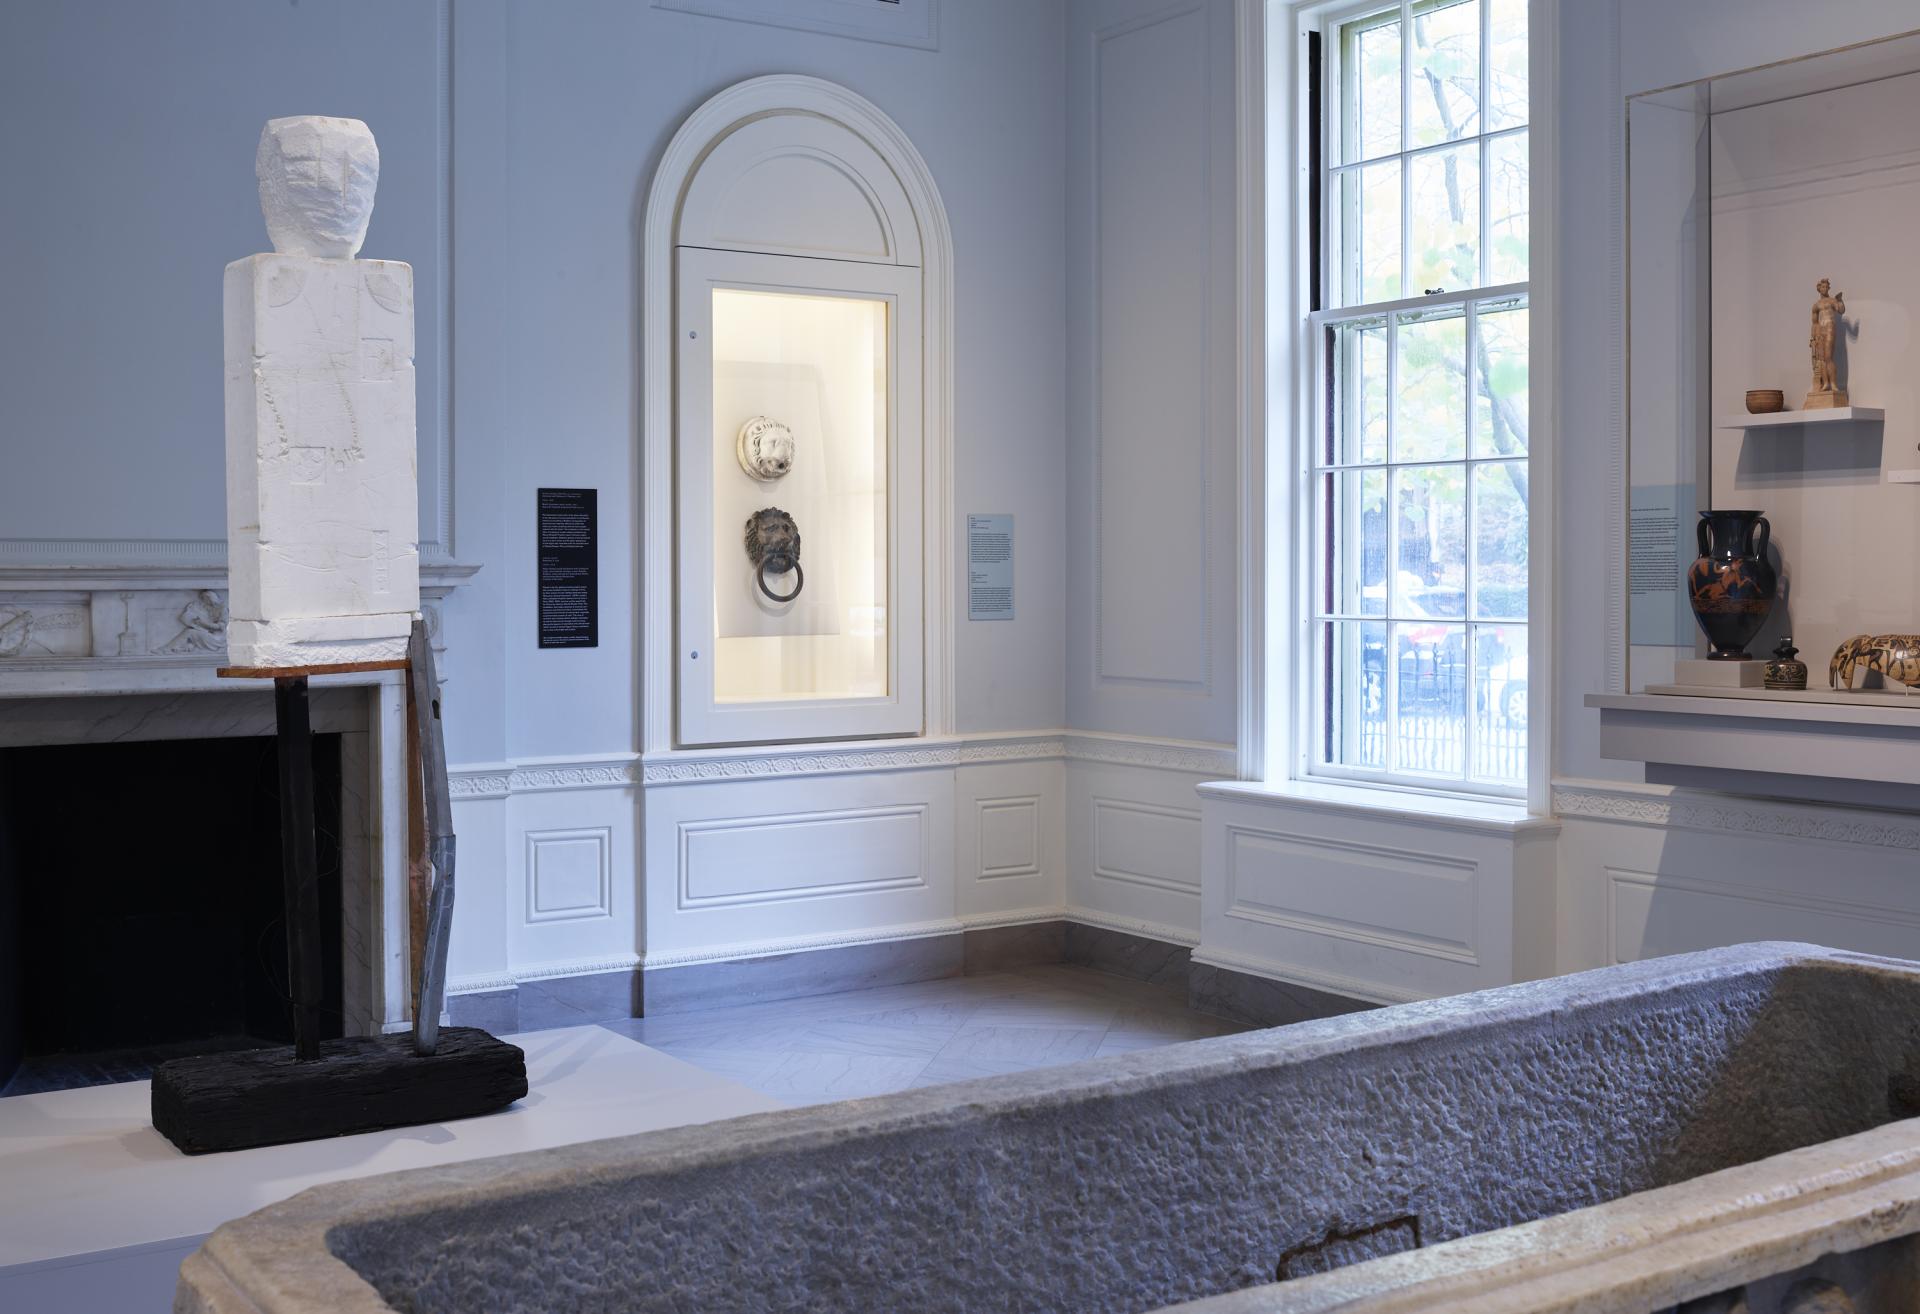 Installation shot of Huma Bhabha "Ghost" sculpture on view in the Greek and Roman gallery